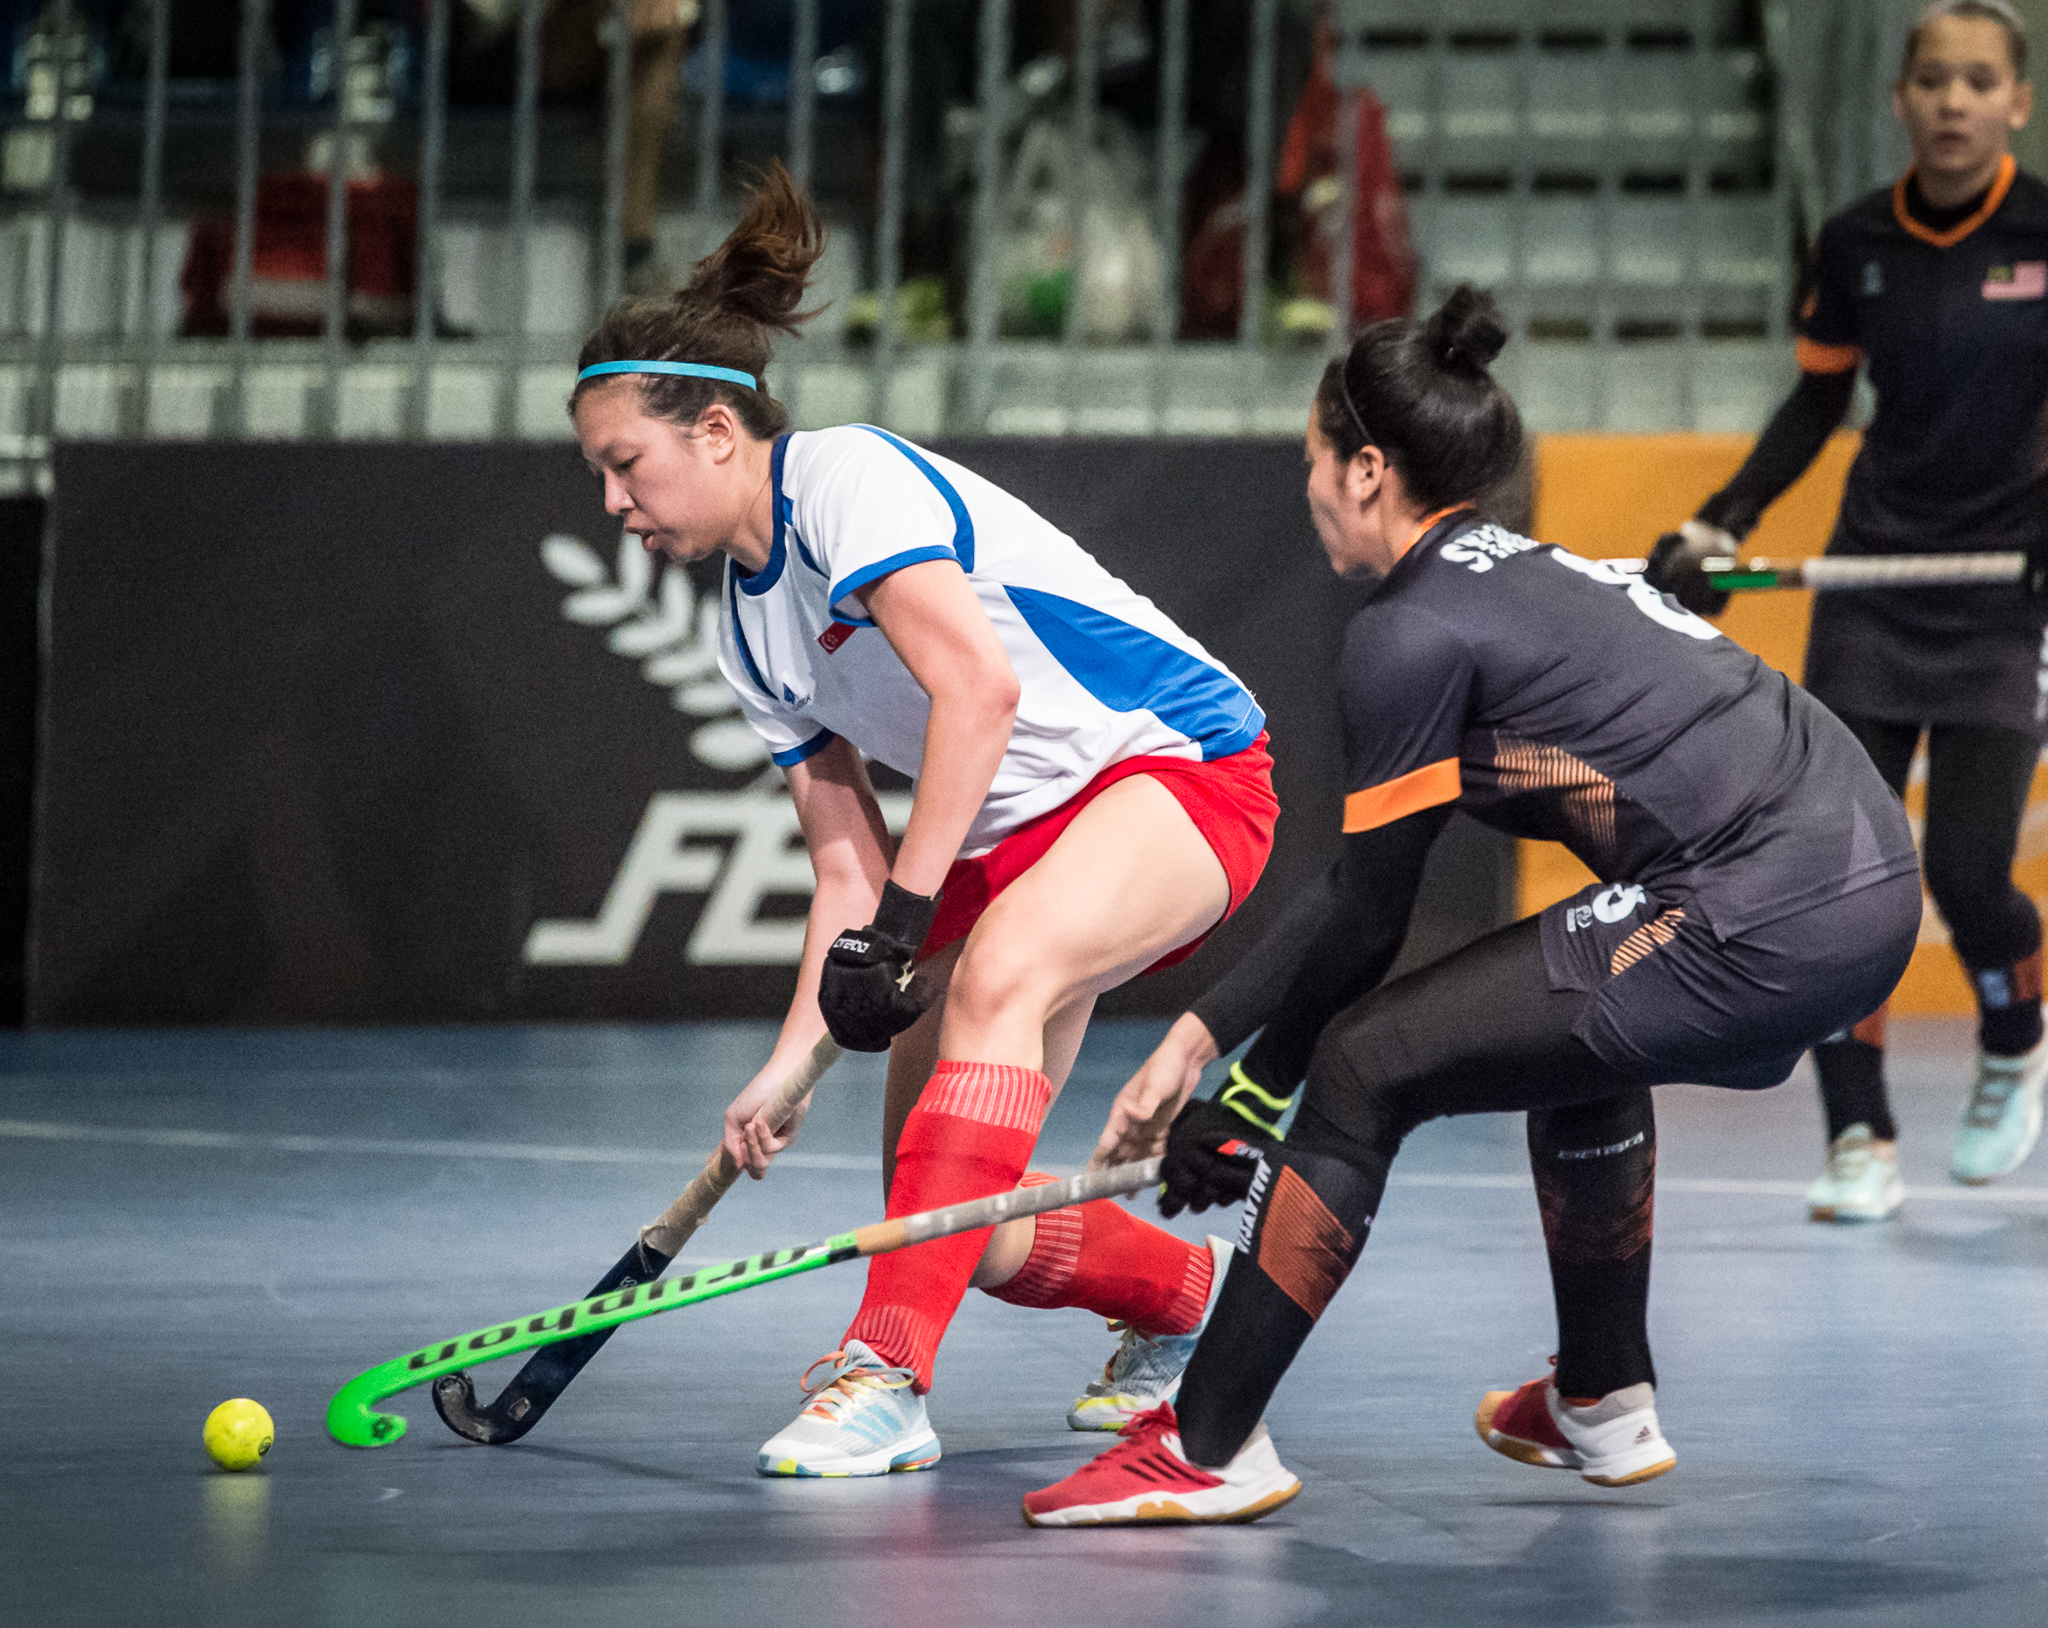 A Singaporean hockey player attempts to dribble past a Malaysian opponent during the SEA Games at the Malaysian International Trade and Exhibition Centre.